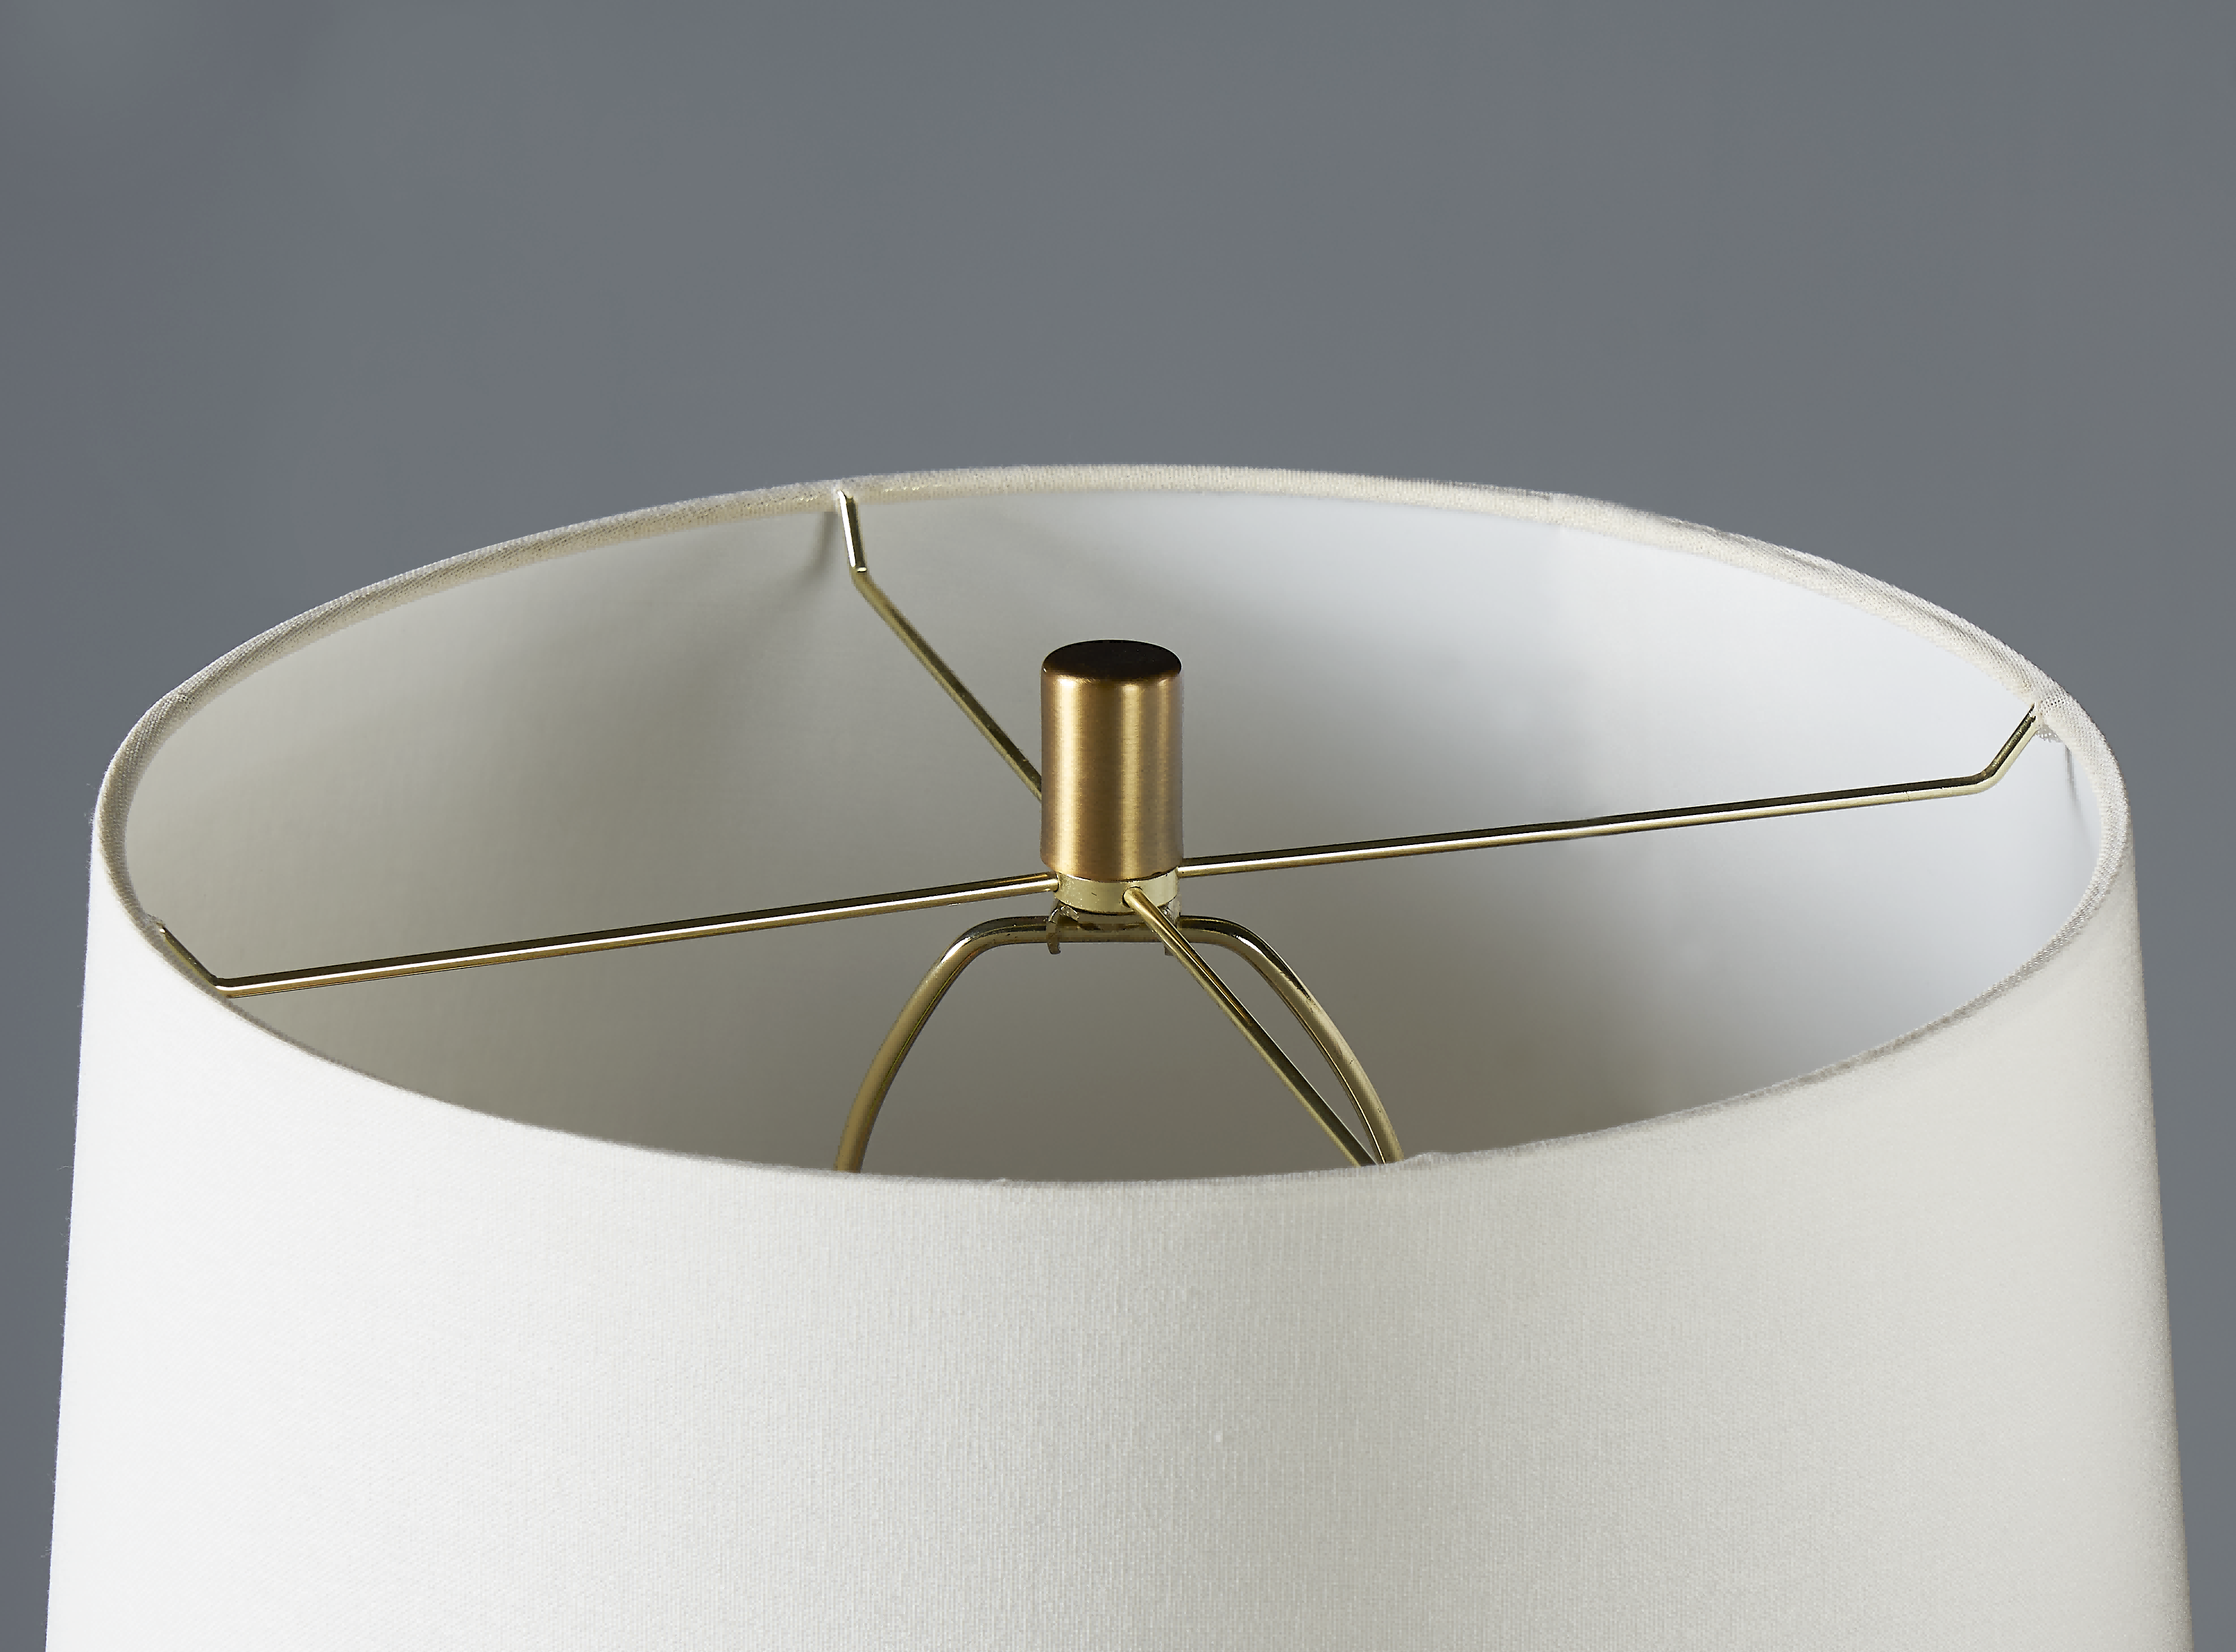 Claire Stone Table Lamp